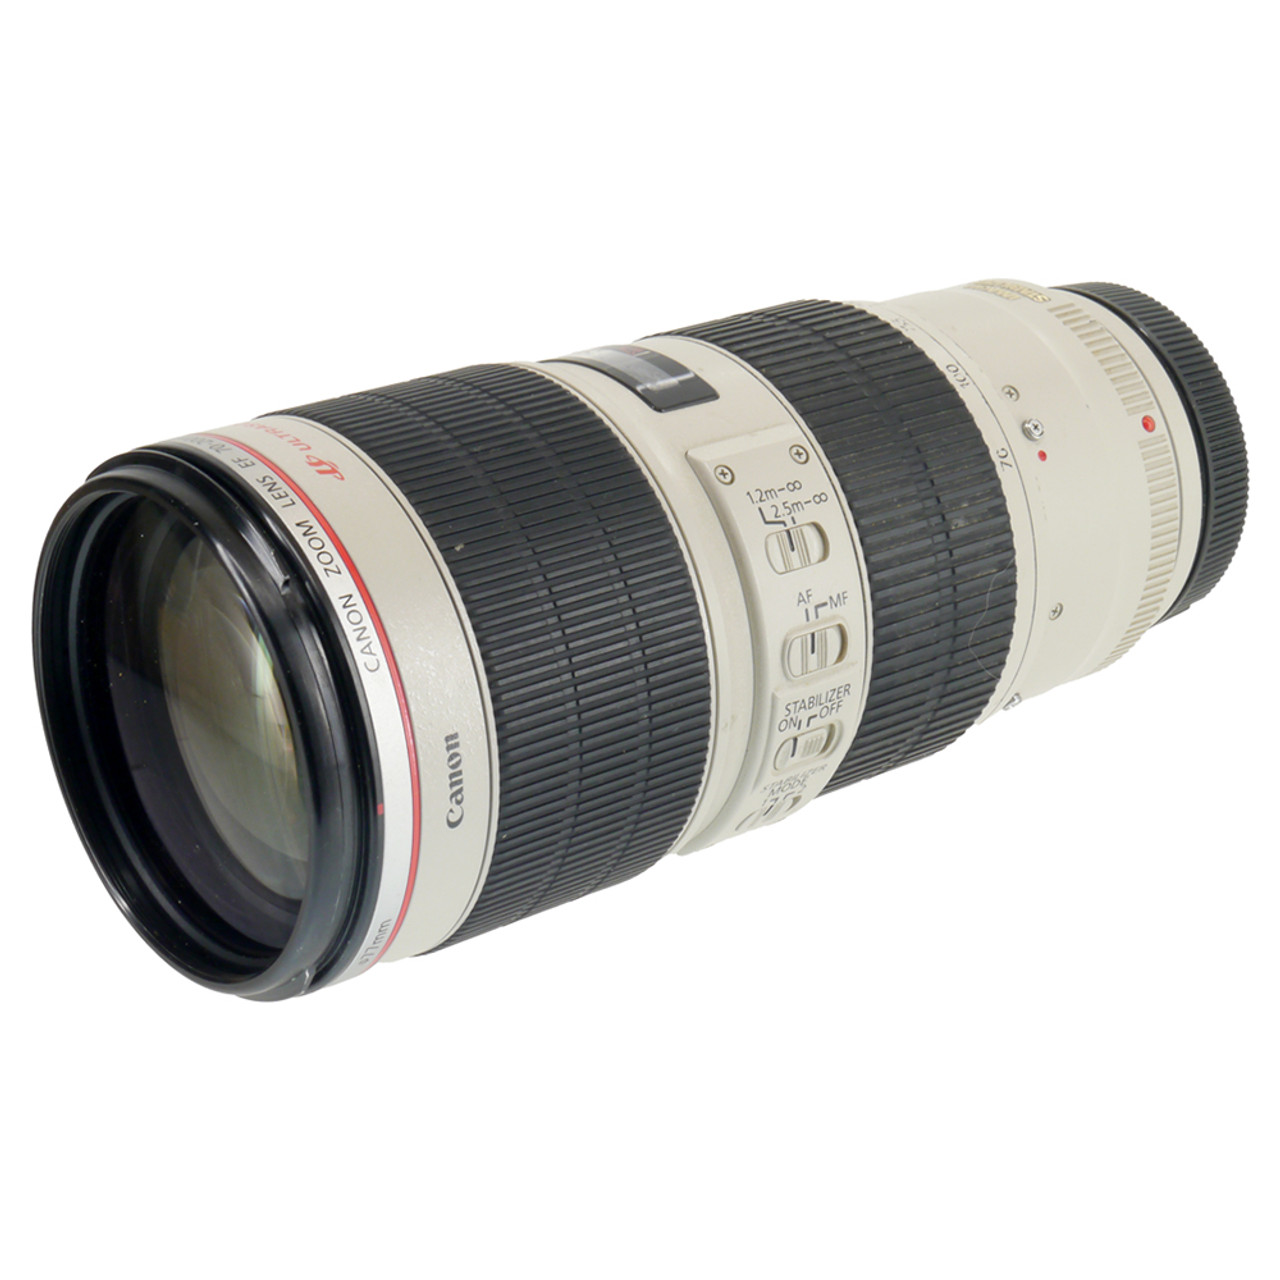 USED CANON EF 70-200MM F2.8 L IS II